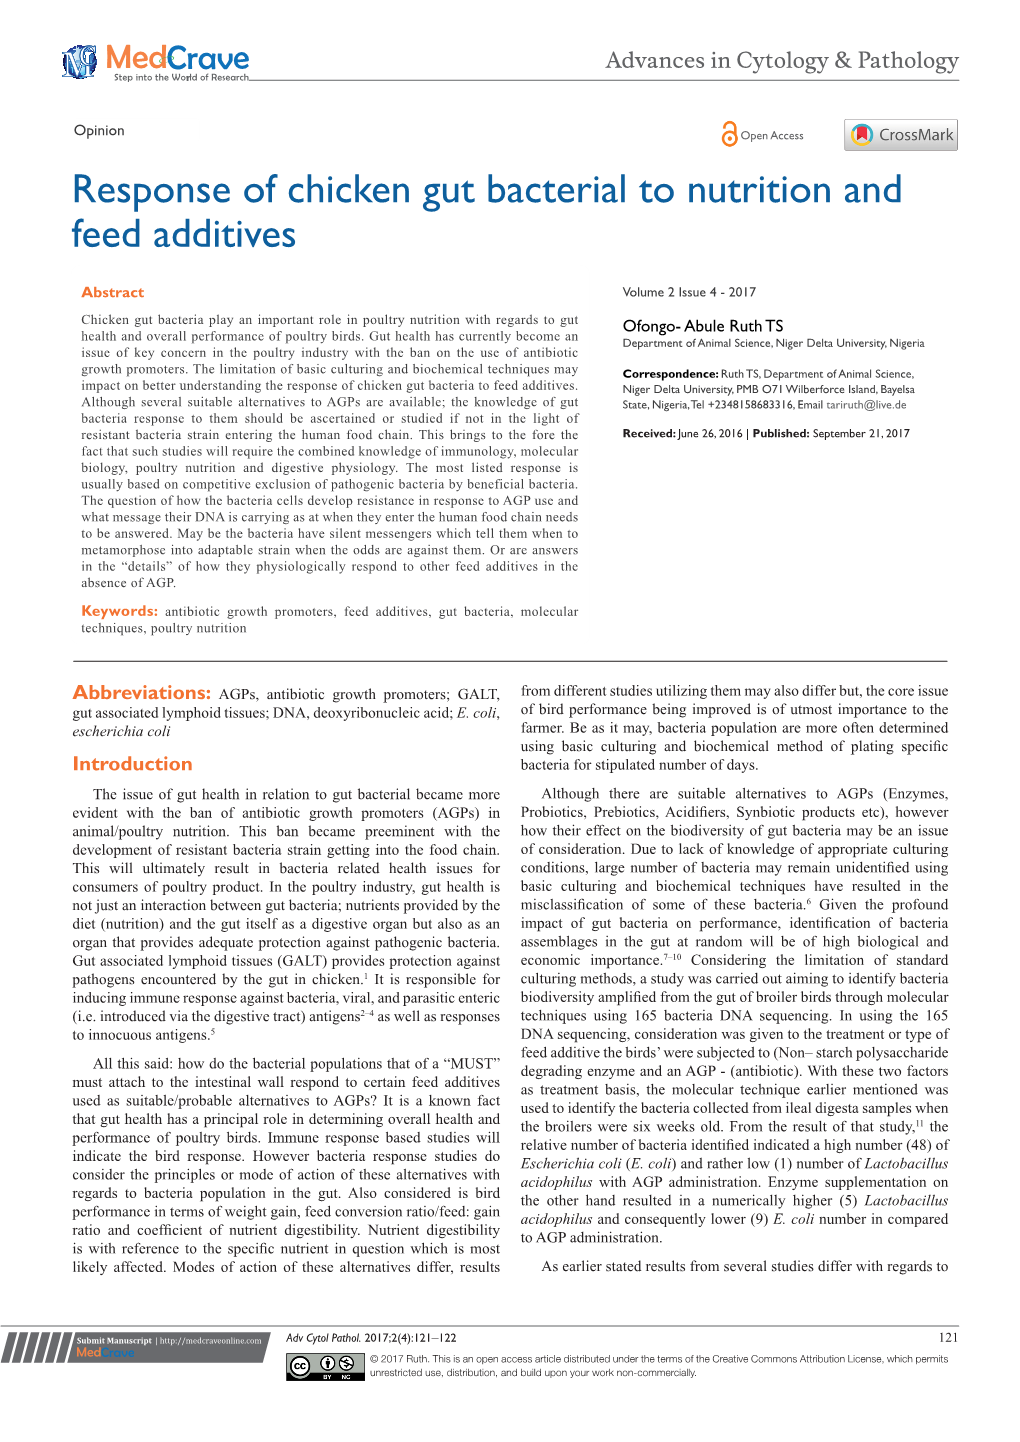 Response of Chicken Gut Bacterial to Nutrition and Feed Additives